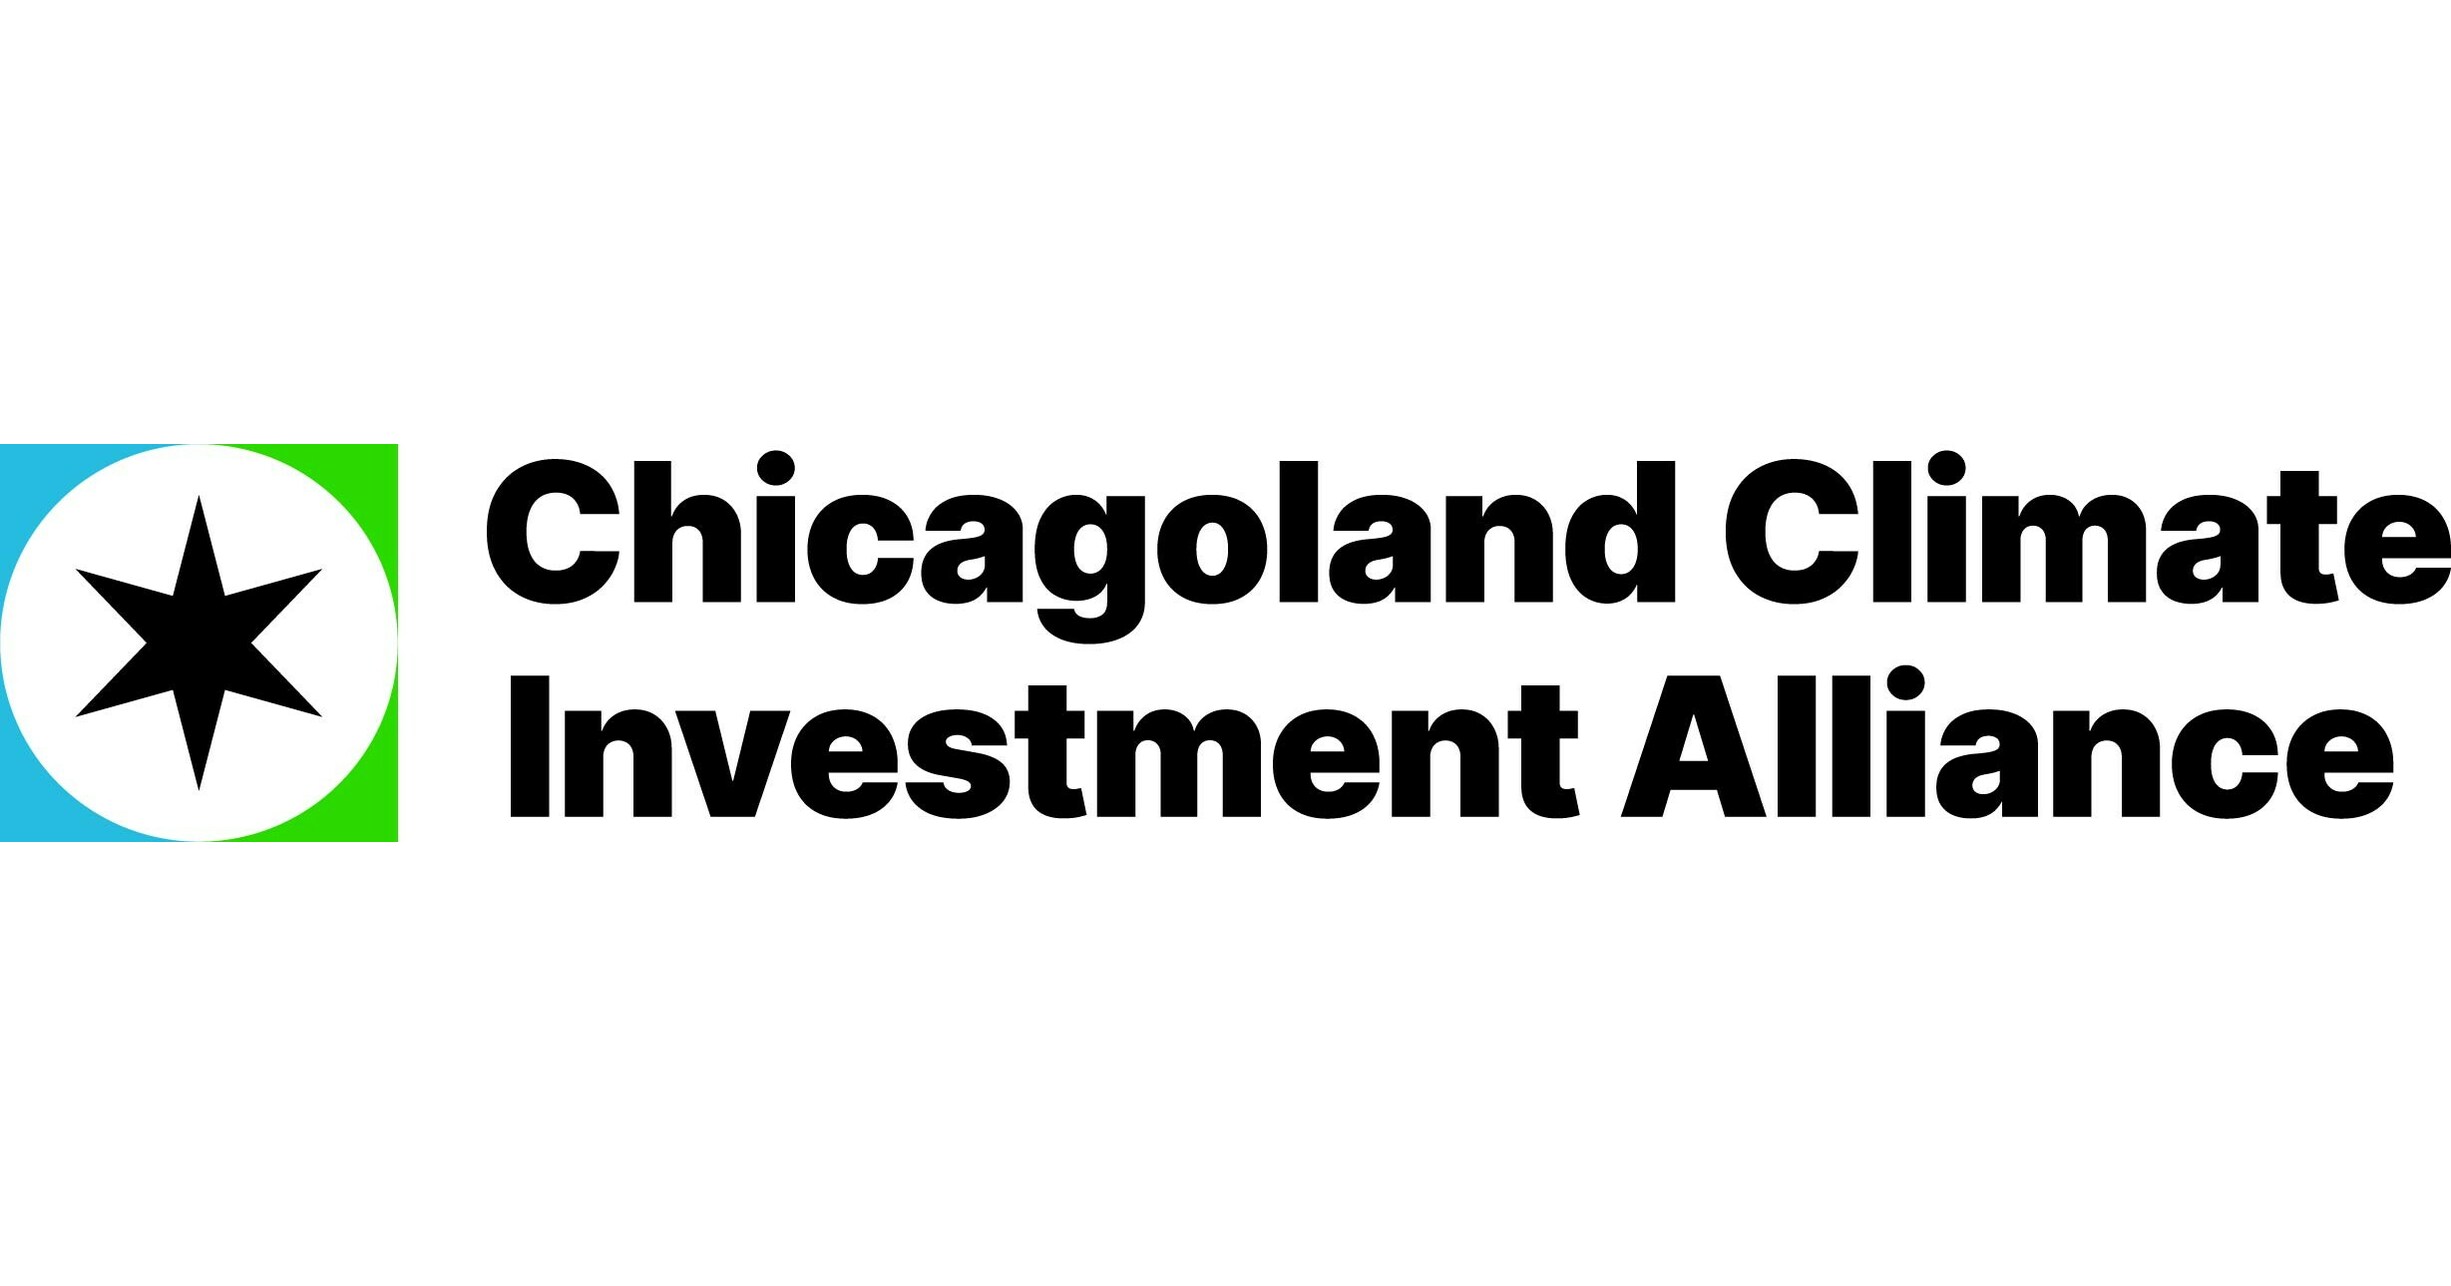 GOVERNOR PRITZKER, MAYOR BRANDON JOHNSON, WORLD BUSINESS CHICAGO & CHICAGOLAND BUSINESS LEADERS LAUNCH THE CHICAGOLAND CLIMATE INVESTMENT ALLIANCE TO DRIVE CLIMATE INNOVATION & ECONOMIC DEVELOPMENT